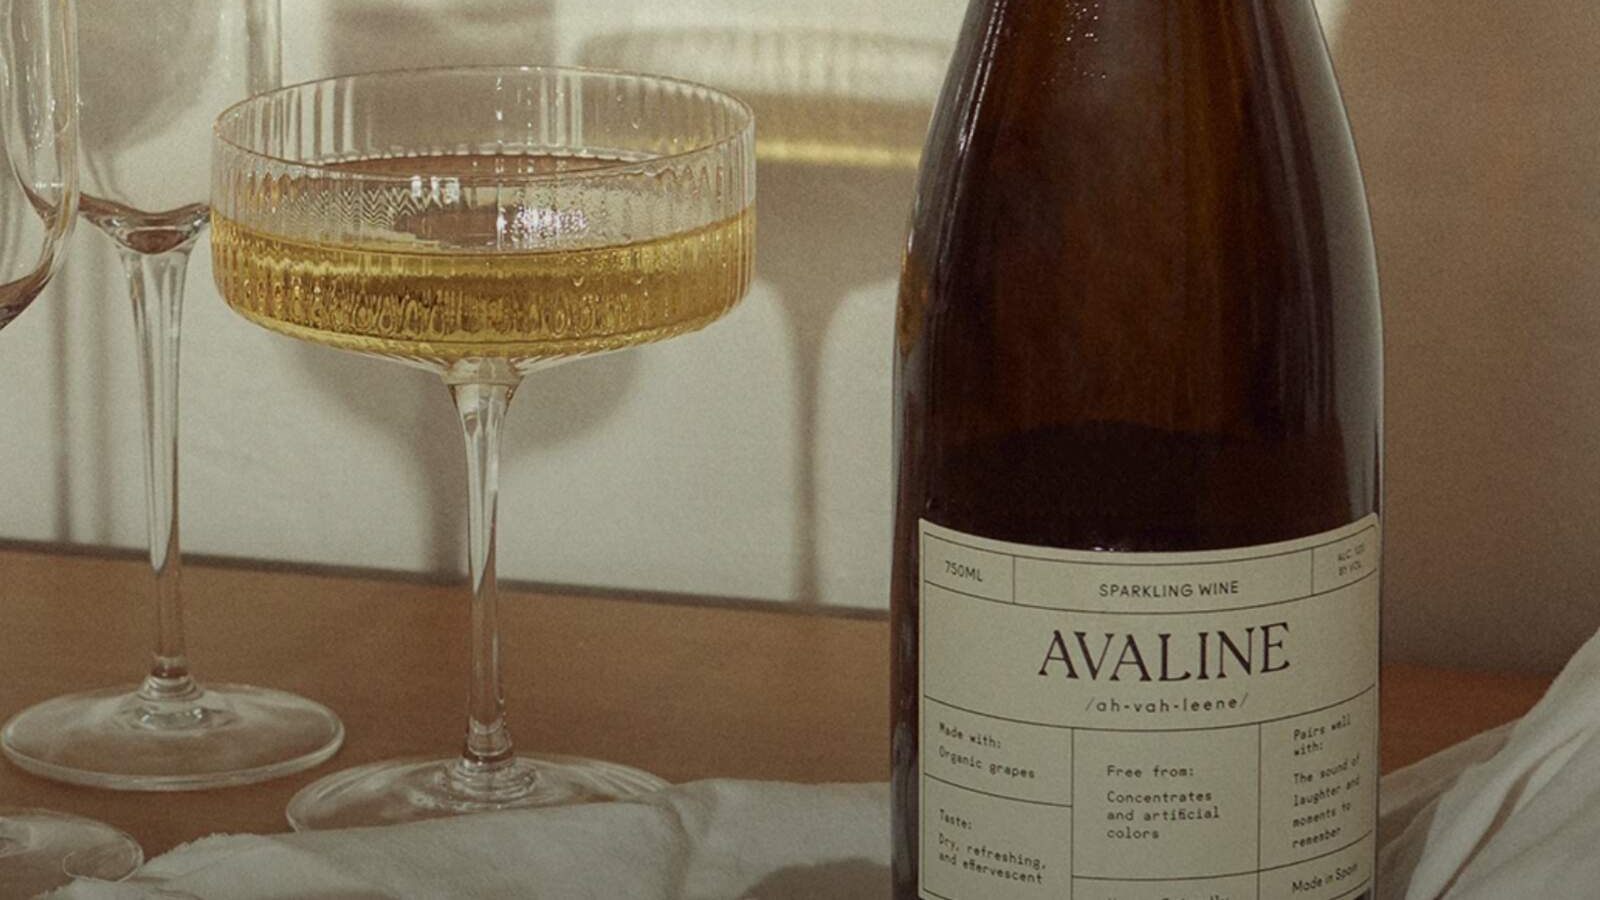 A bottle of Avaline